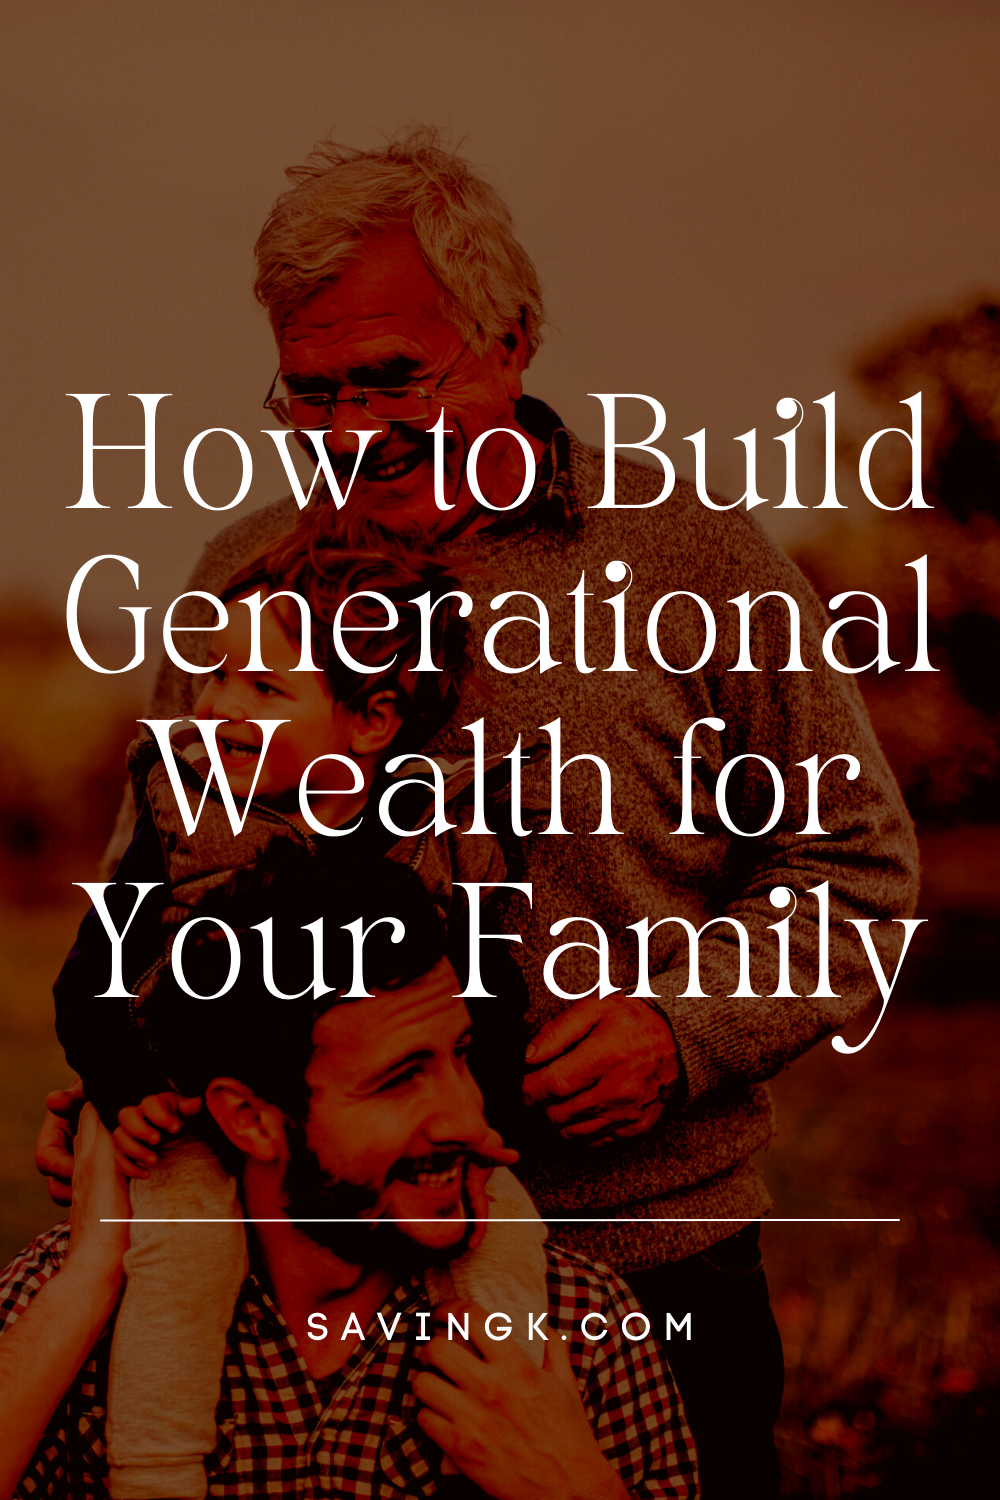 If you want to make sure that your family is taken care of for generations to come, you need to start thinking about generational wealth.